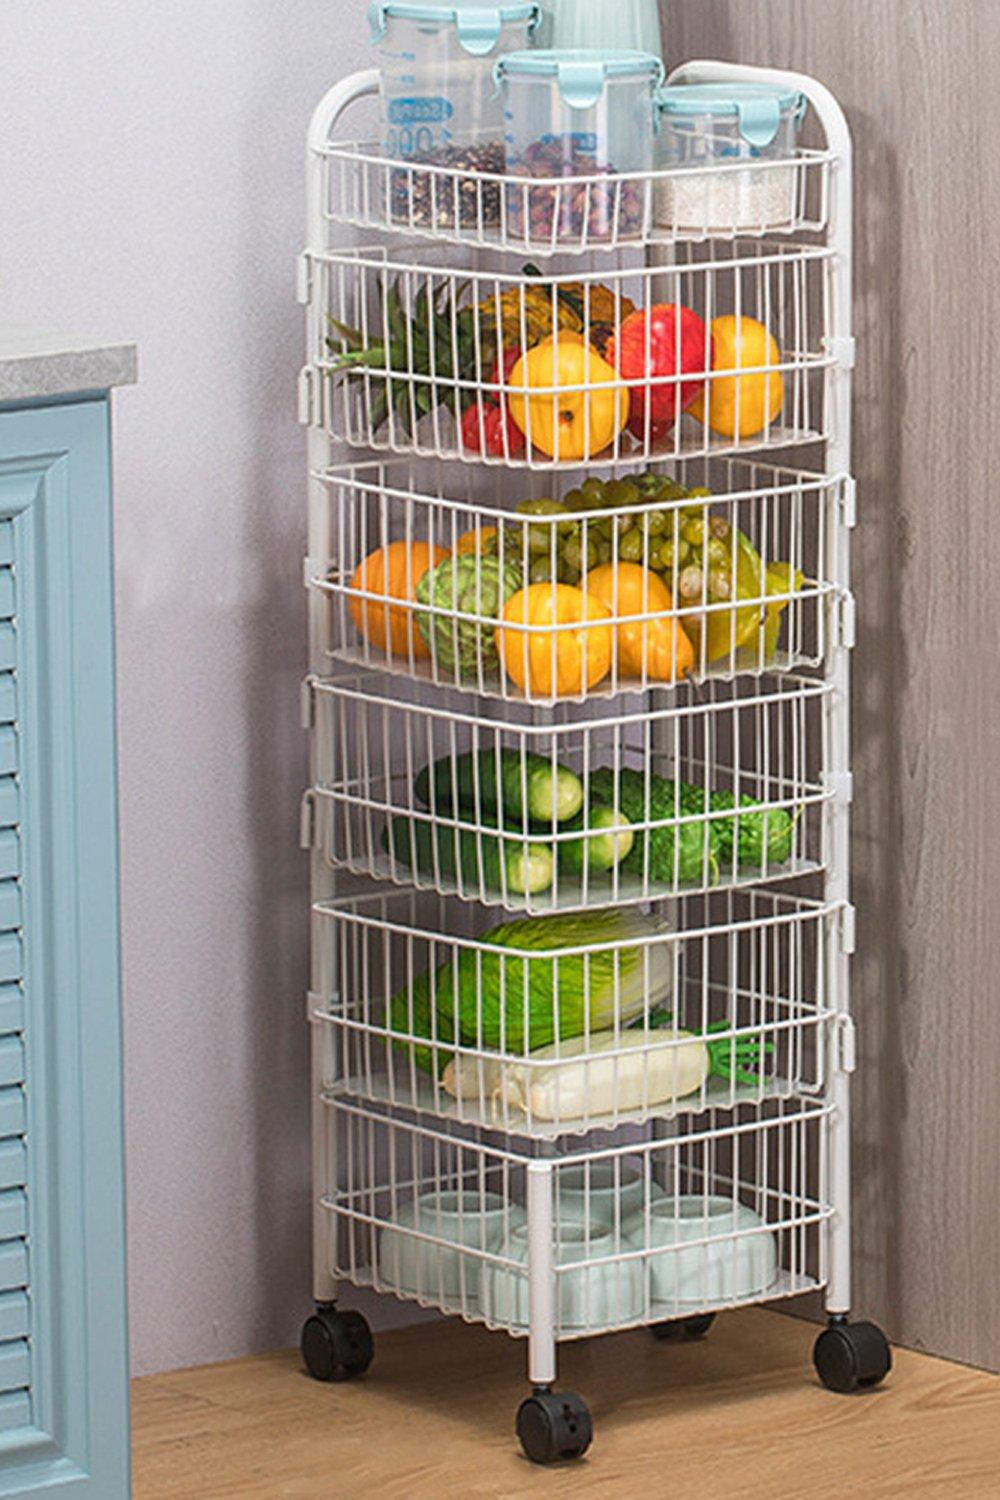 5-Layer Iron Wire Rotating Trolley Cart Scalable Spice Rack Vegetable Fruit Storage Basket Organizer